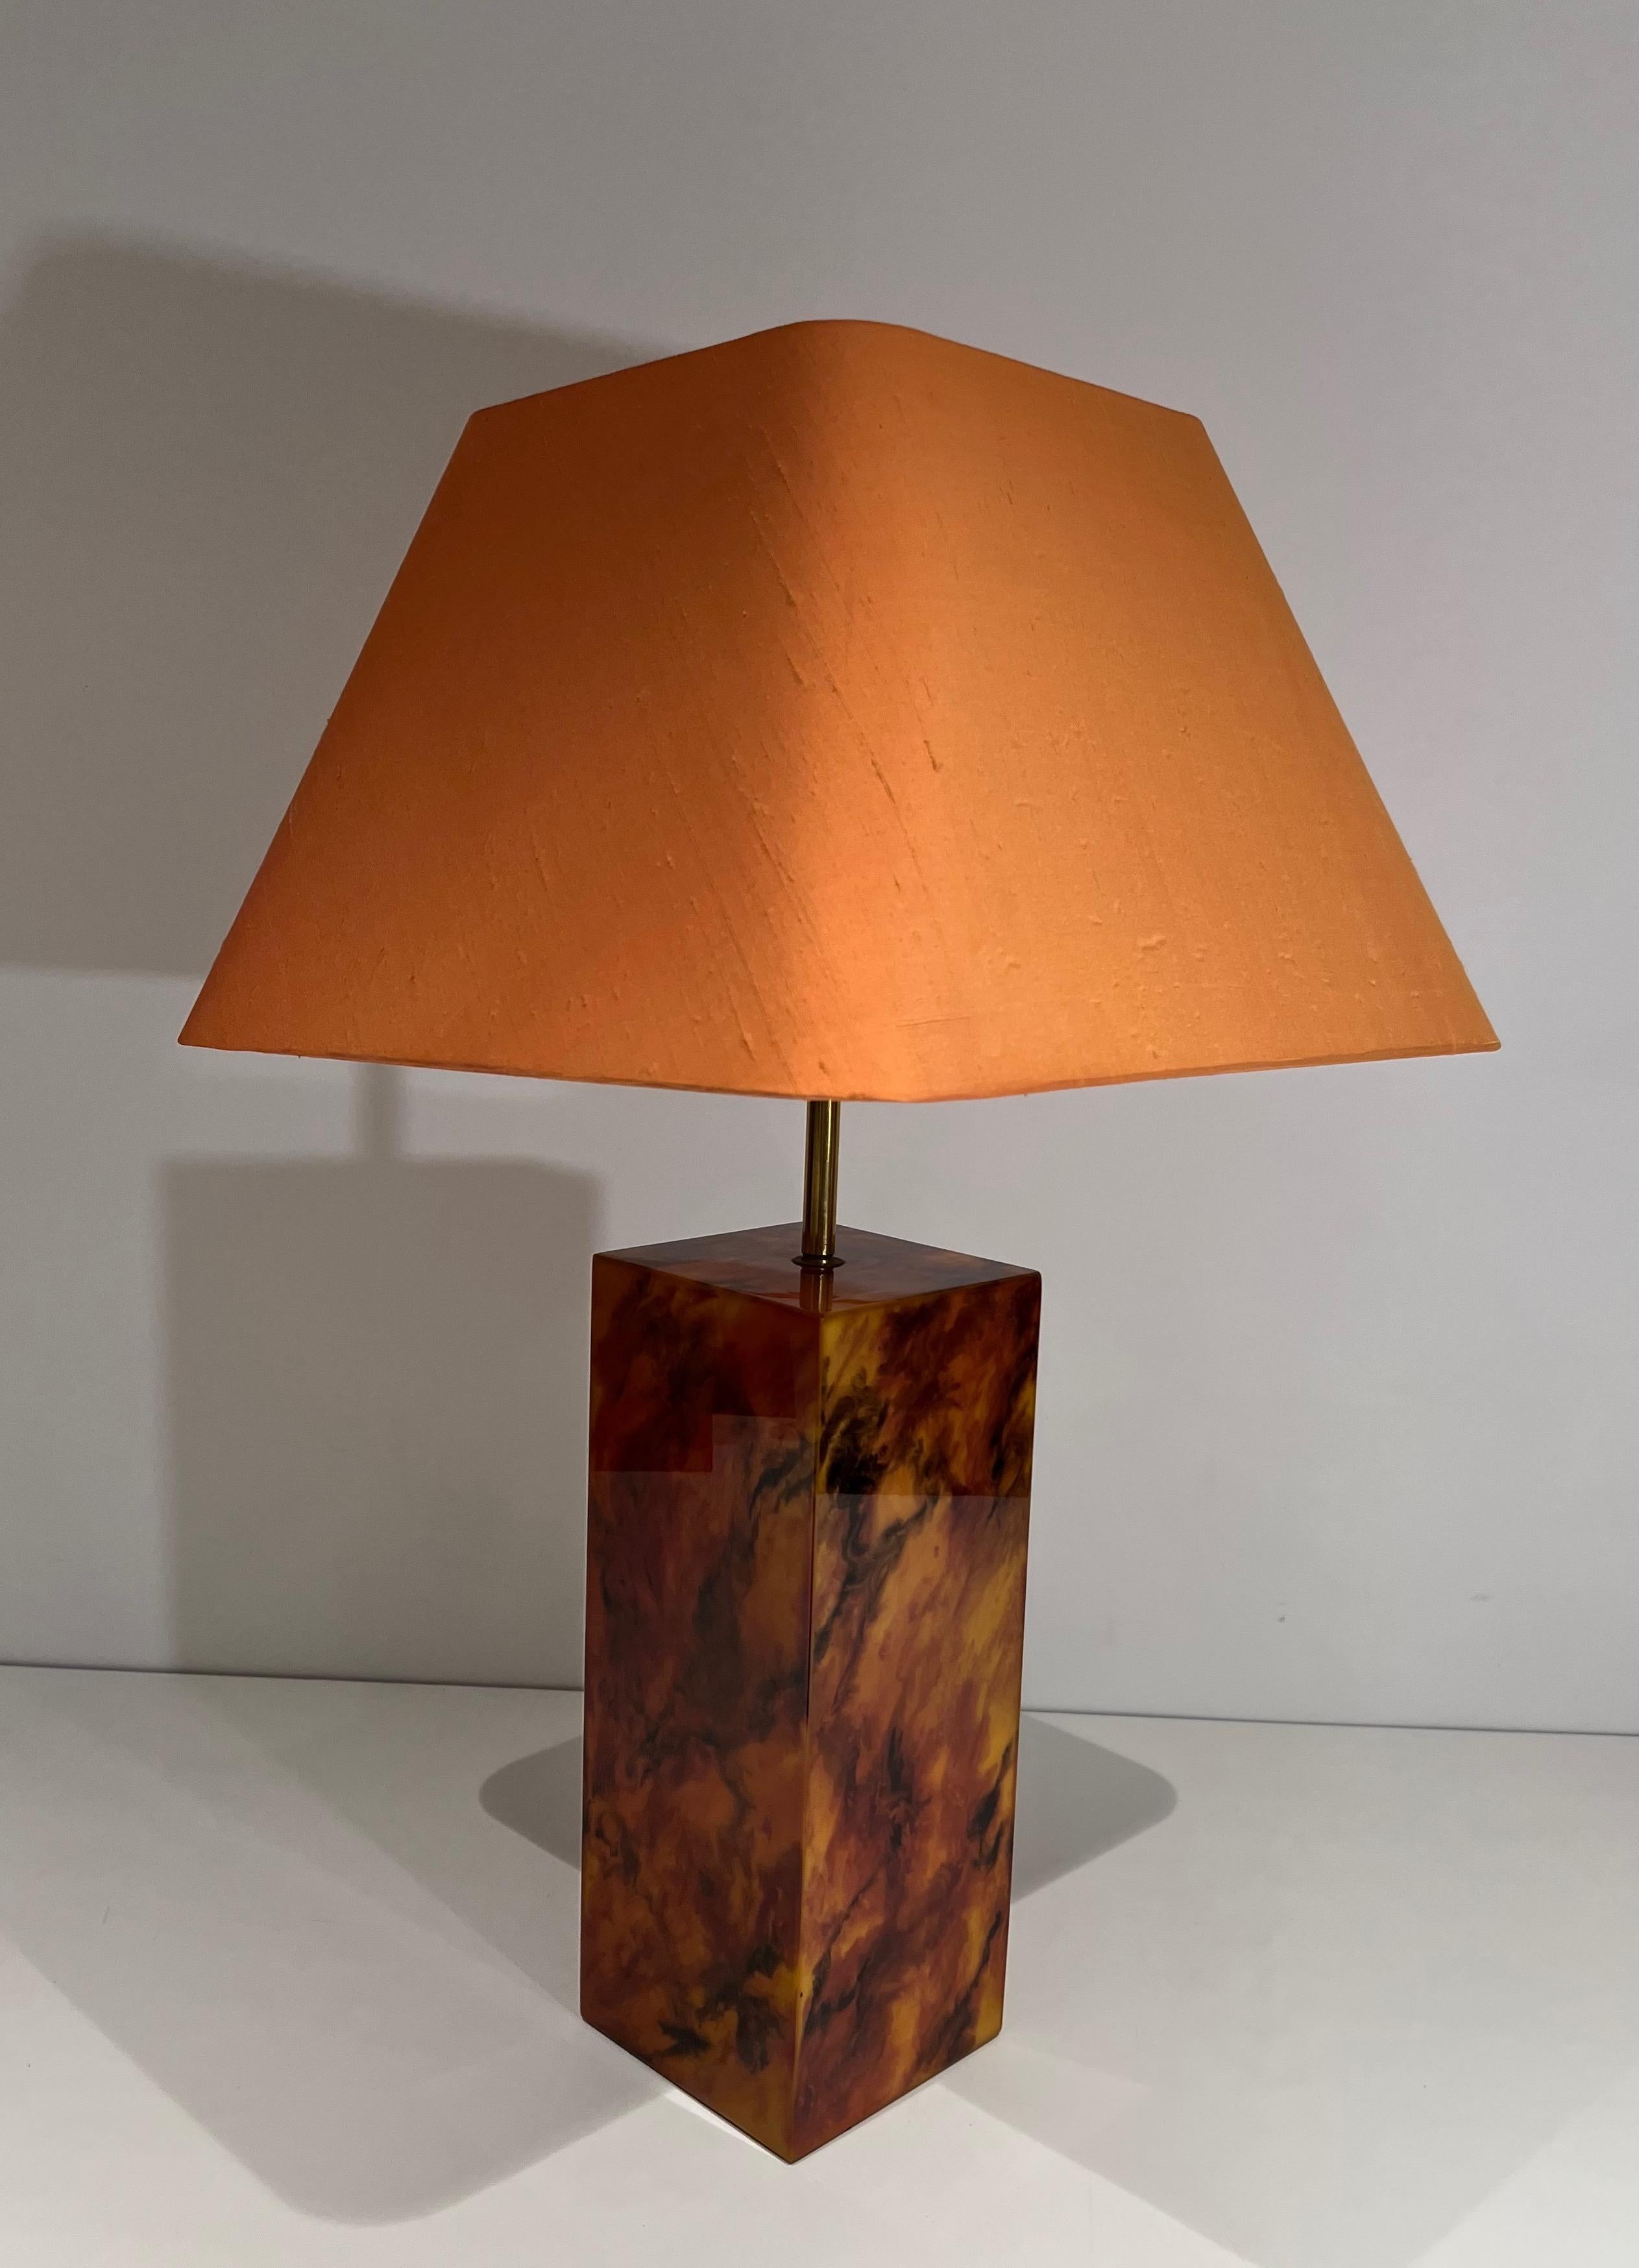 Pair of Lucite Lamps Imitating Tortoise Shell. French work. Circa 1970 For Sale 5